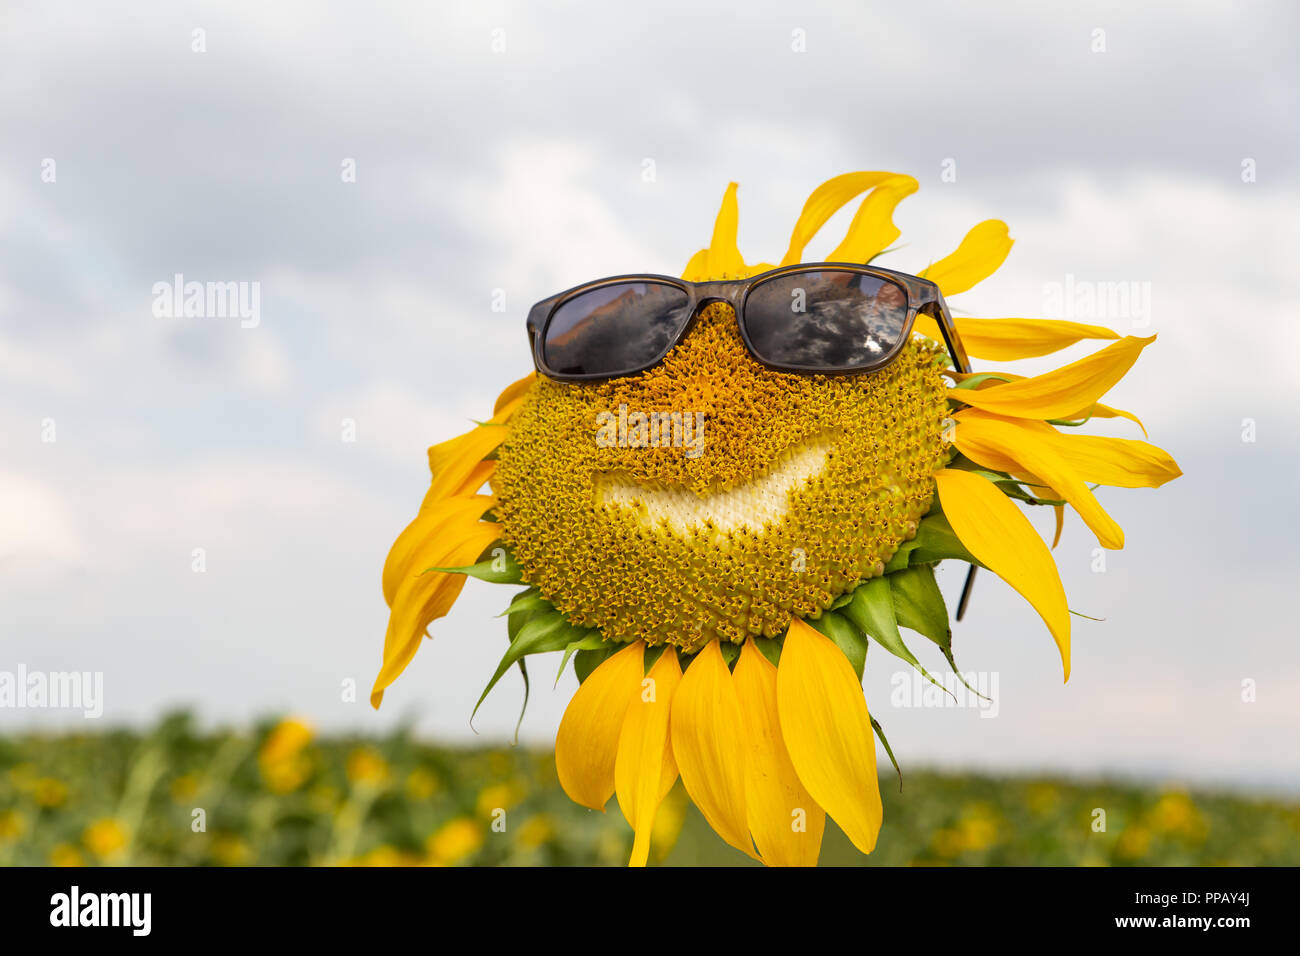 Smiling sunflower with sunglasses. Stock Photo